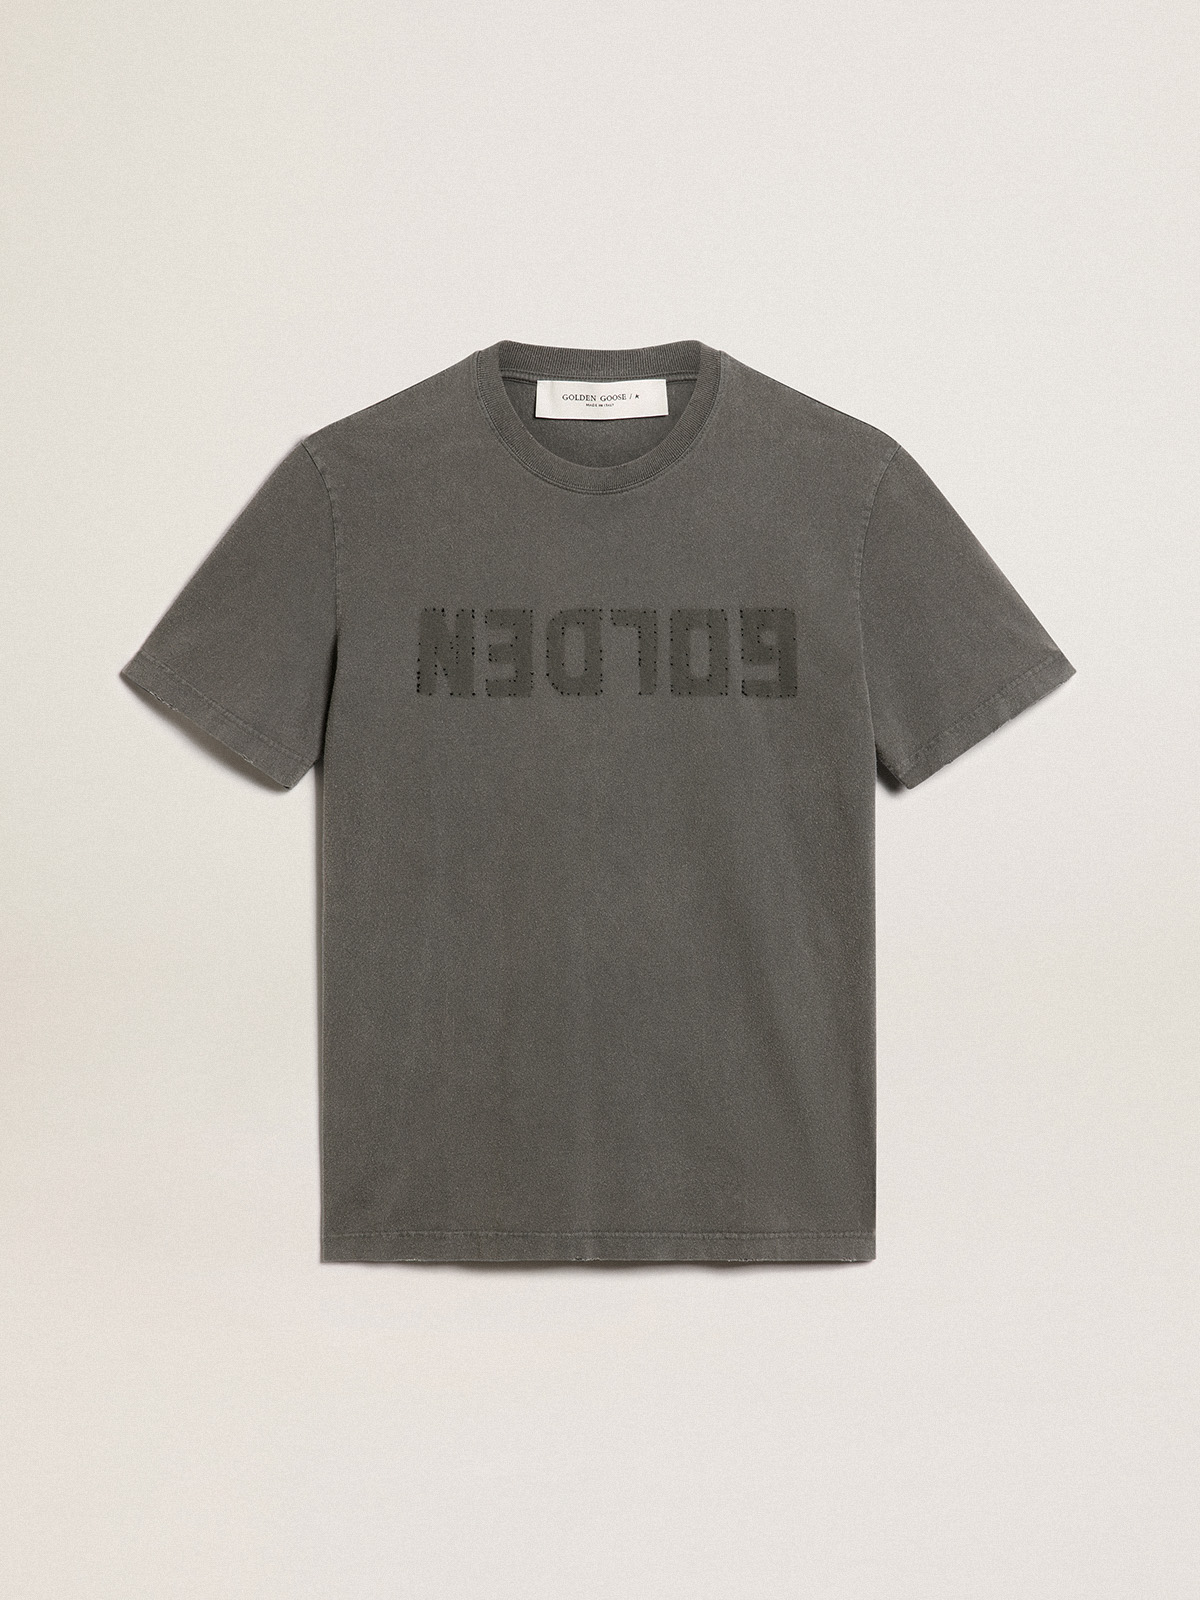 Men's anthracite gray T-shirt with distressed treatment